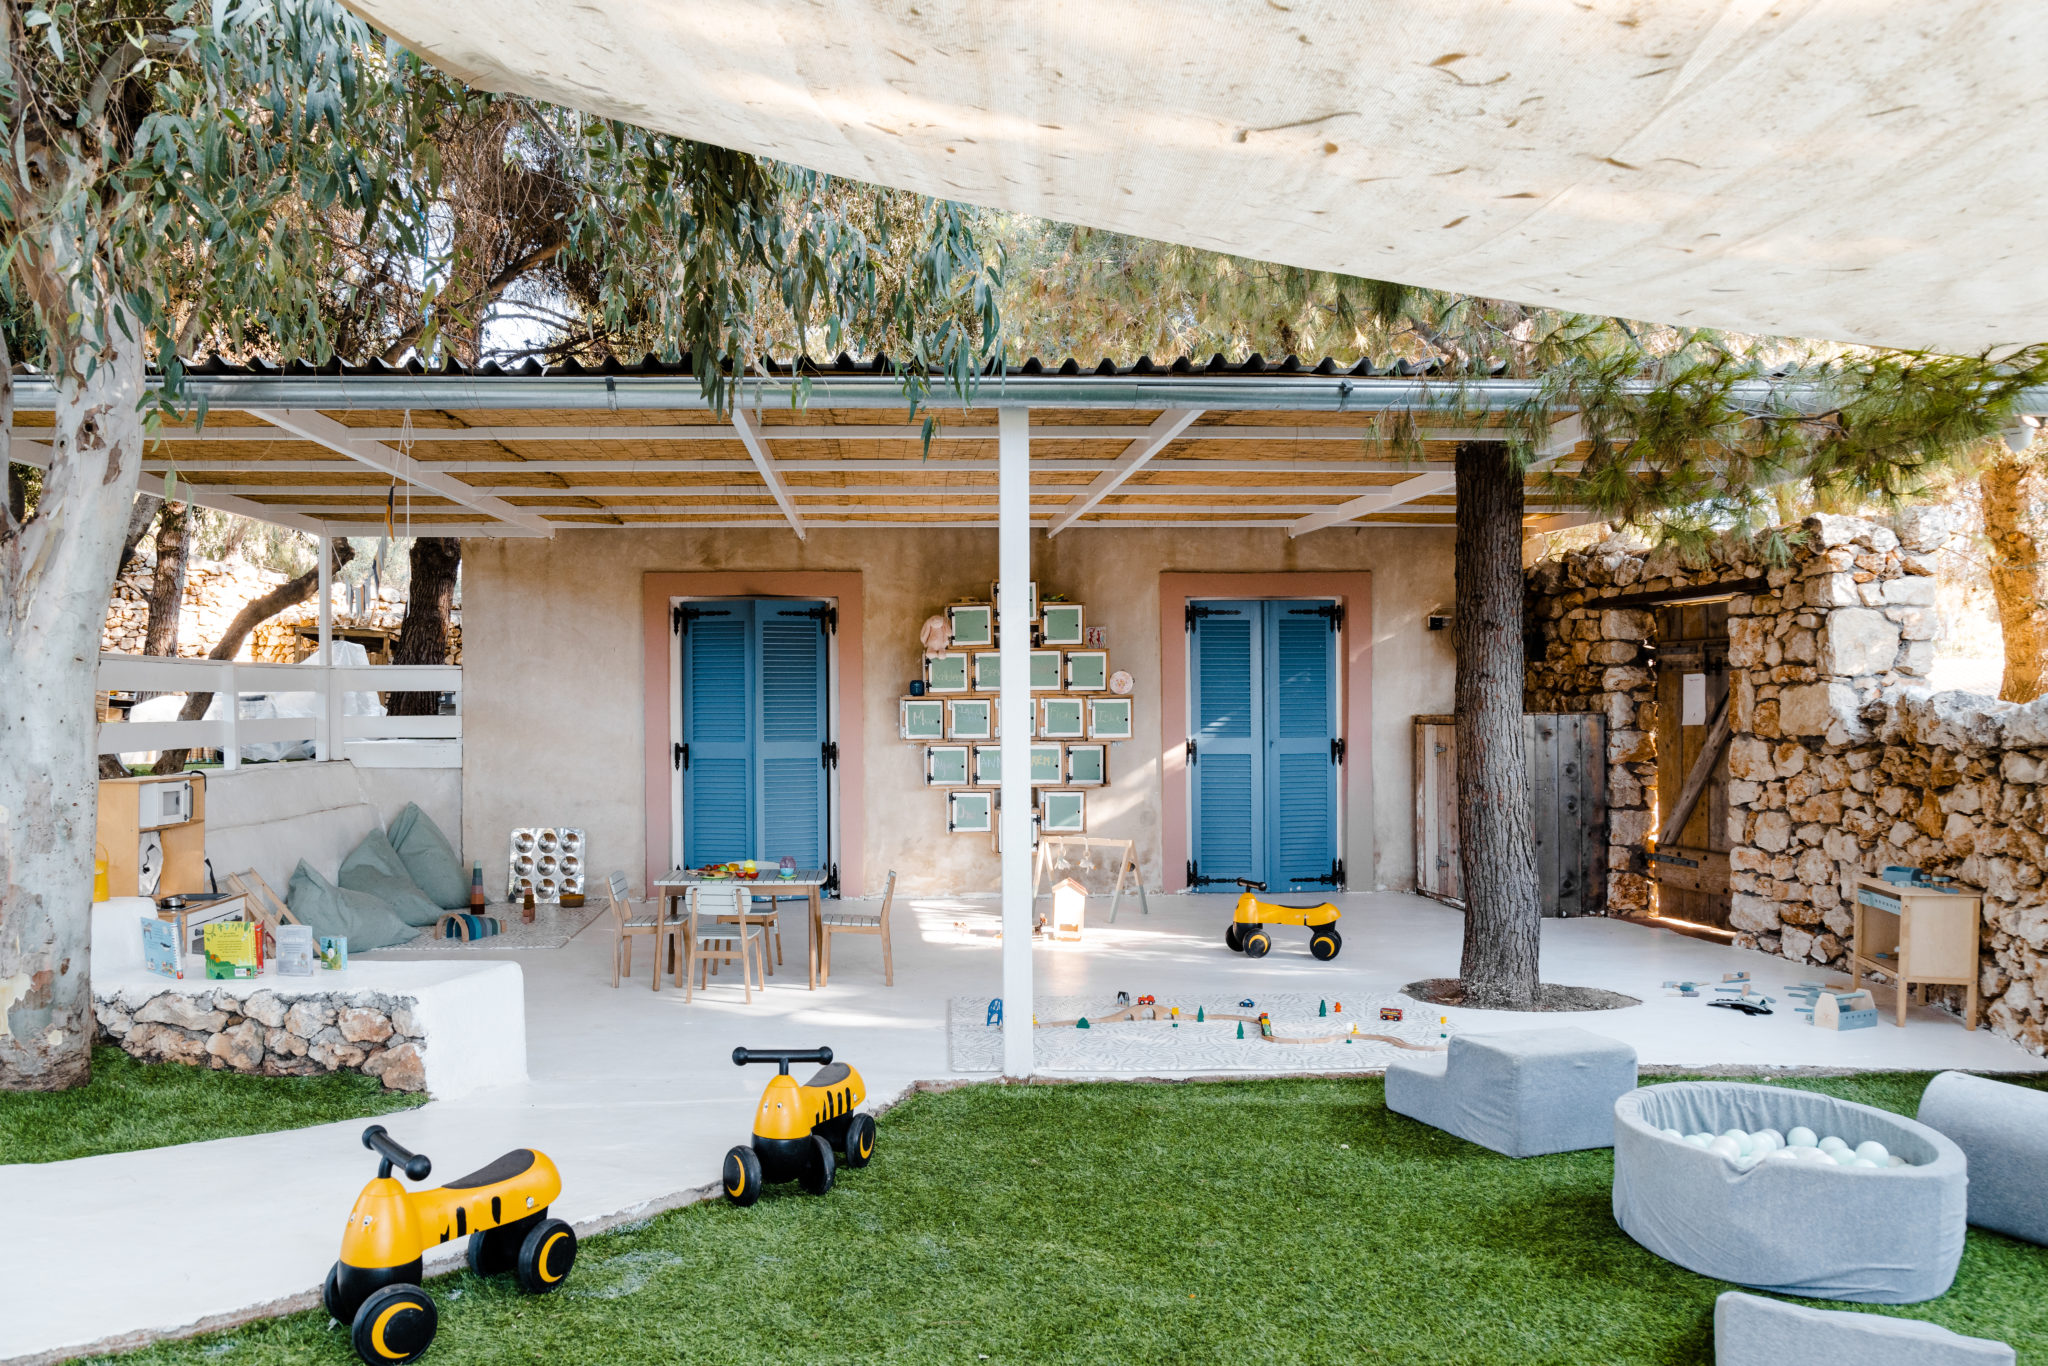 A shaded outdoor creche space